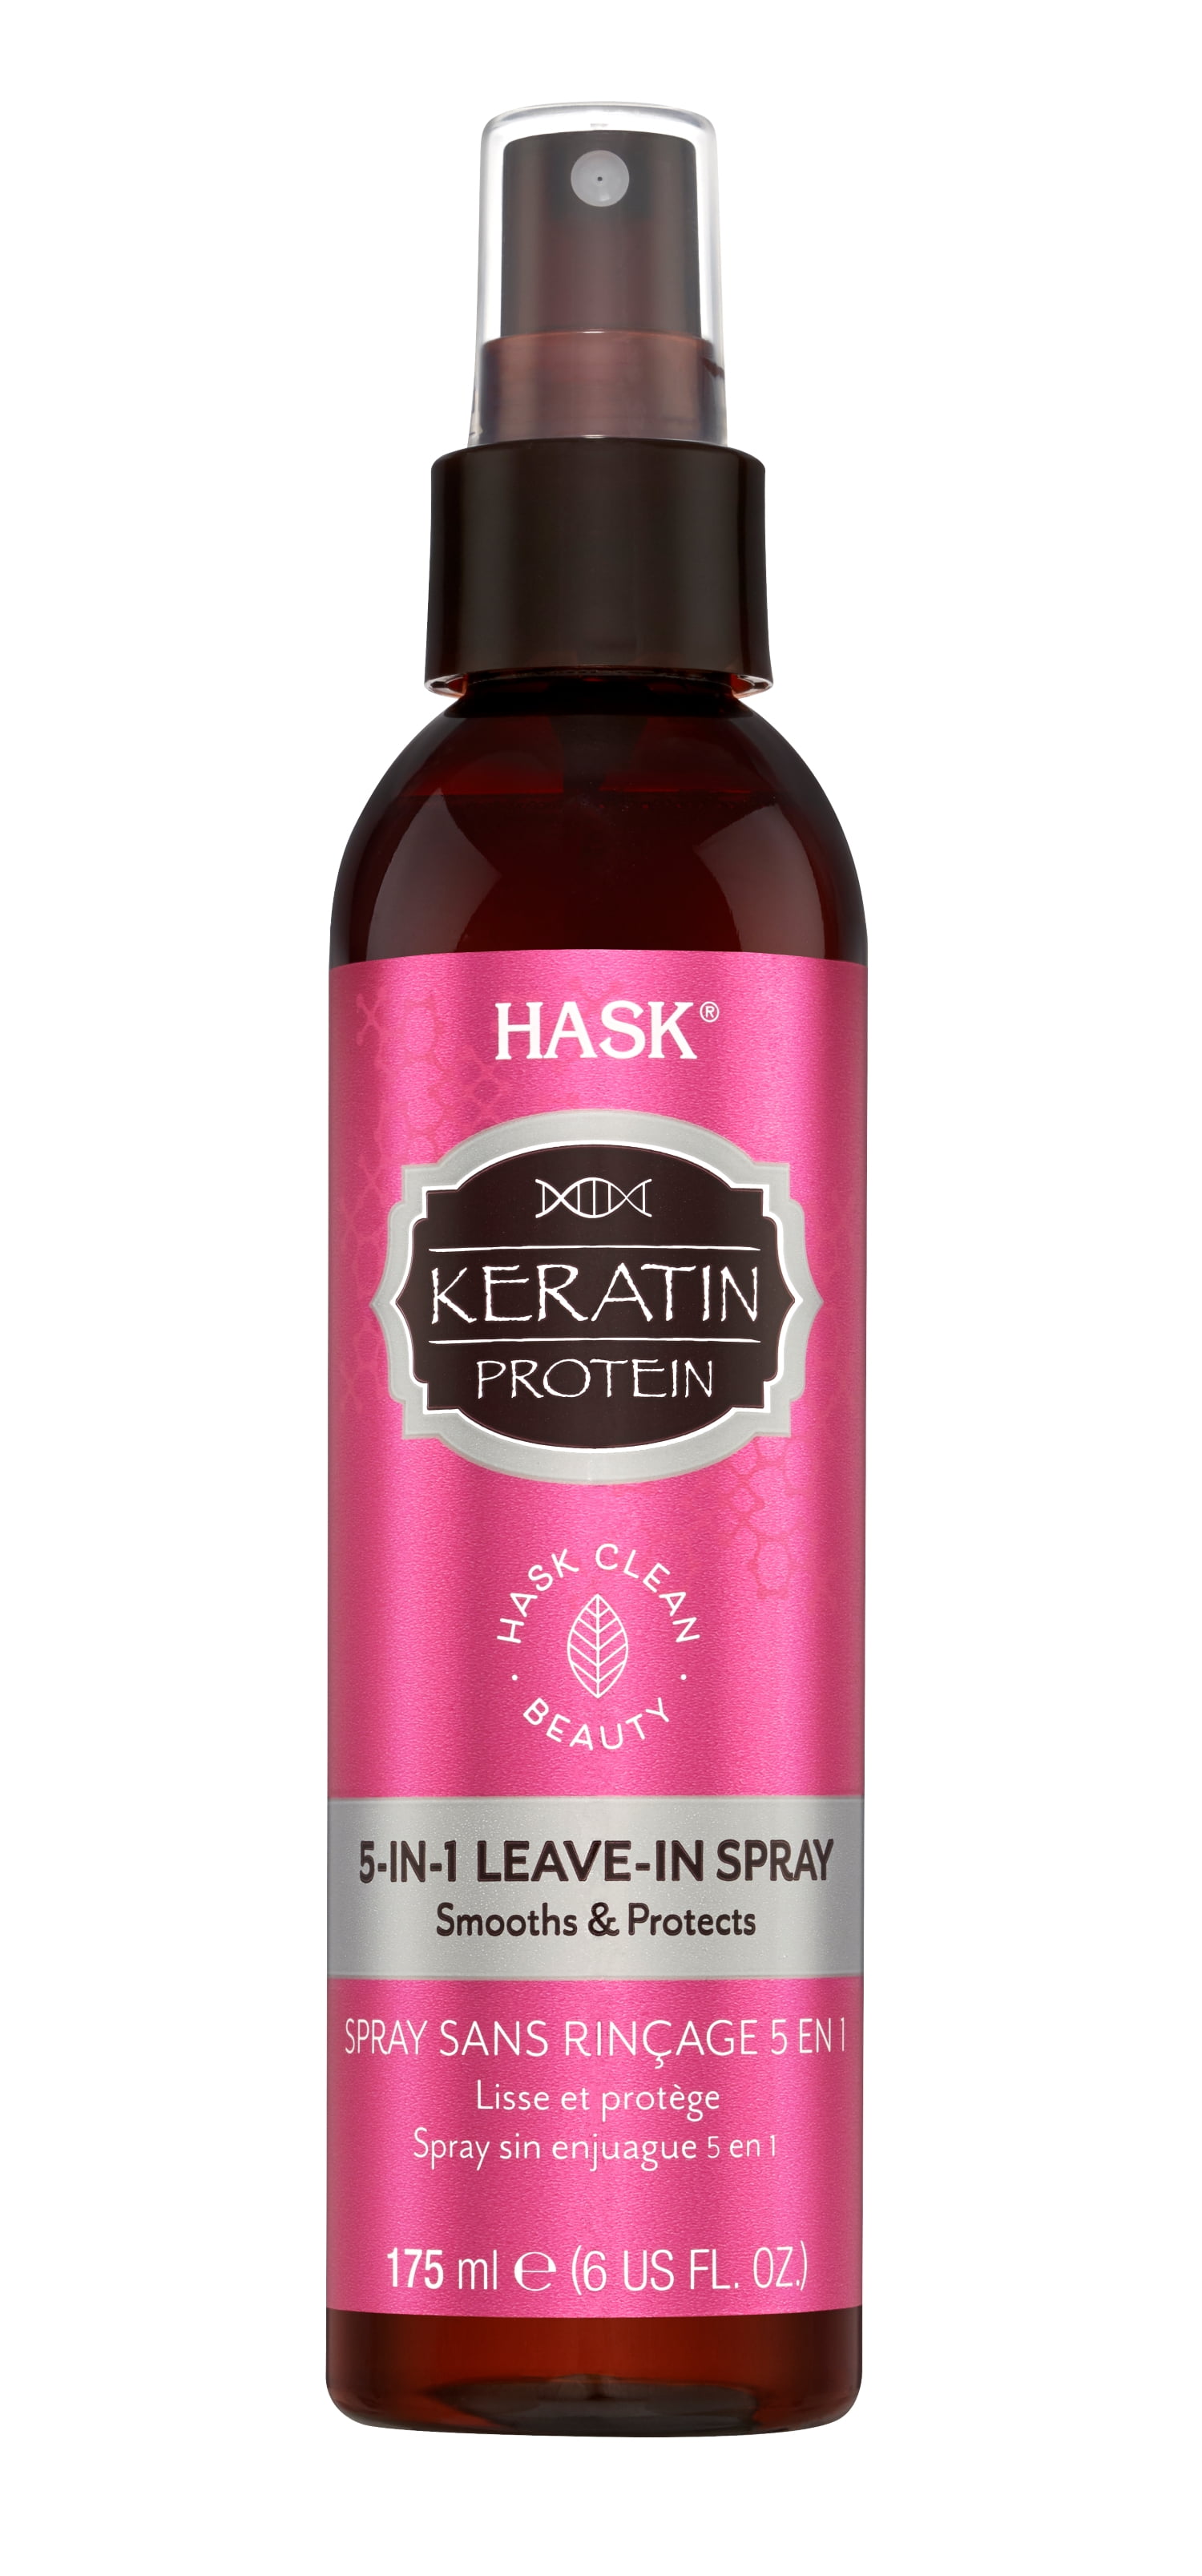 Hask Keratin Protein Shine Enhancing 5-in-1 Leave-In Hair Spray with Keratin, 6 fl oz